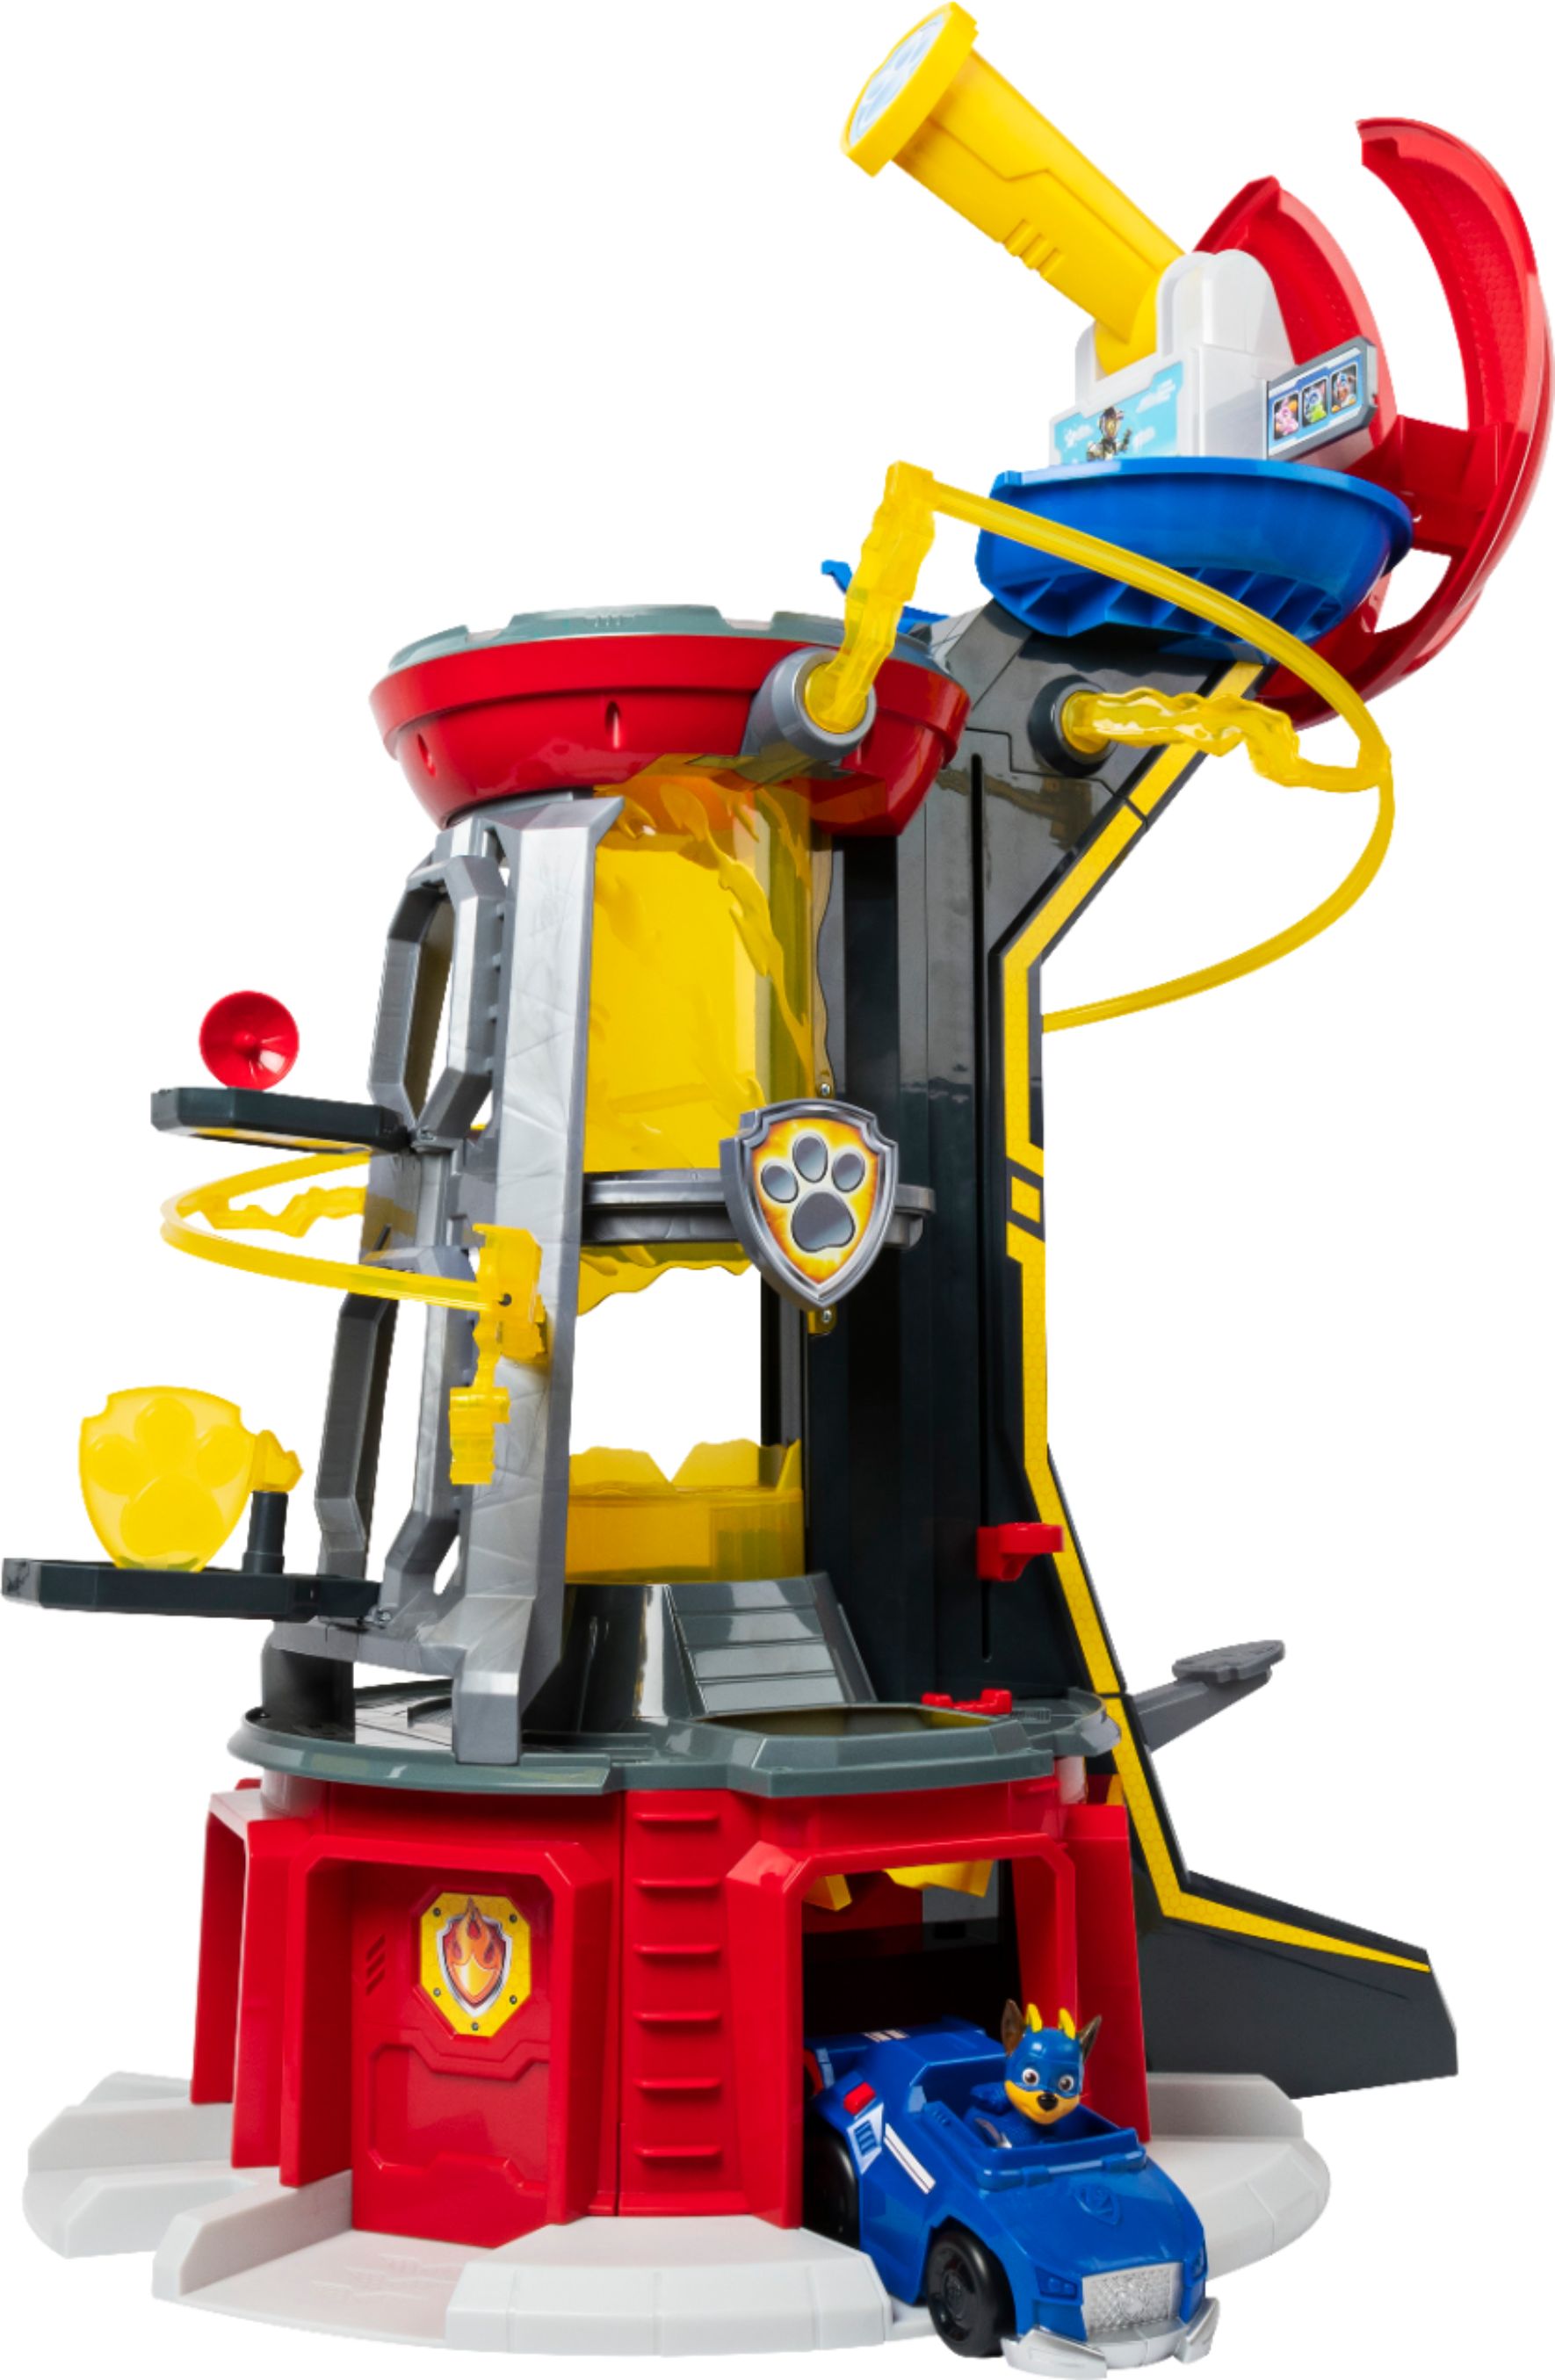 paw patrol lookout tower cars